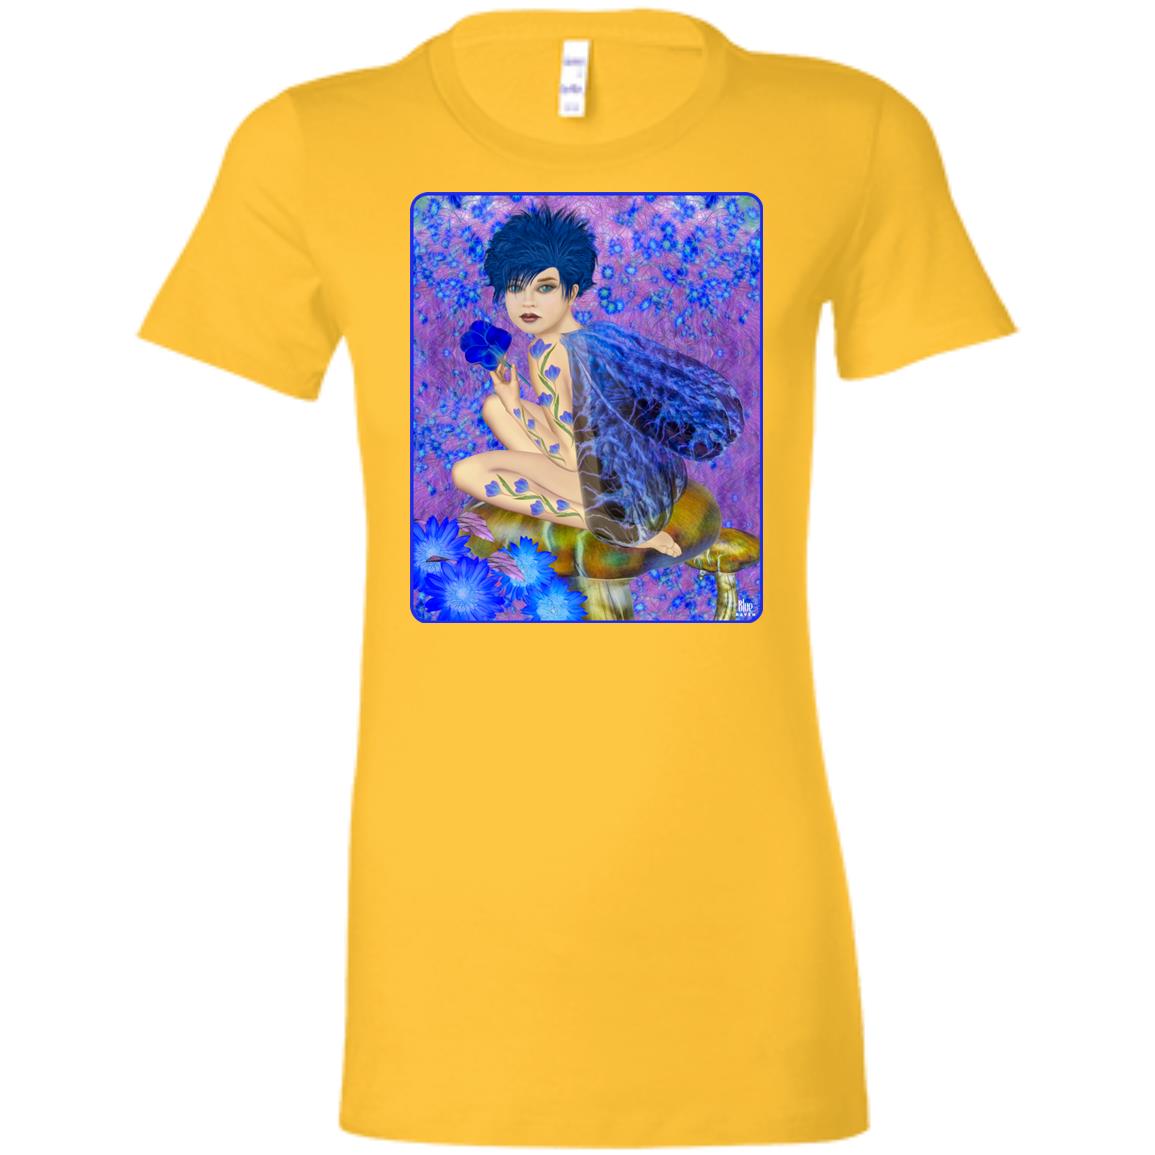 Blue Fairy - Women's Fitted T-Shirt